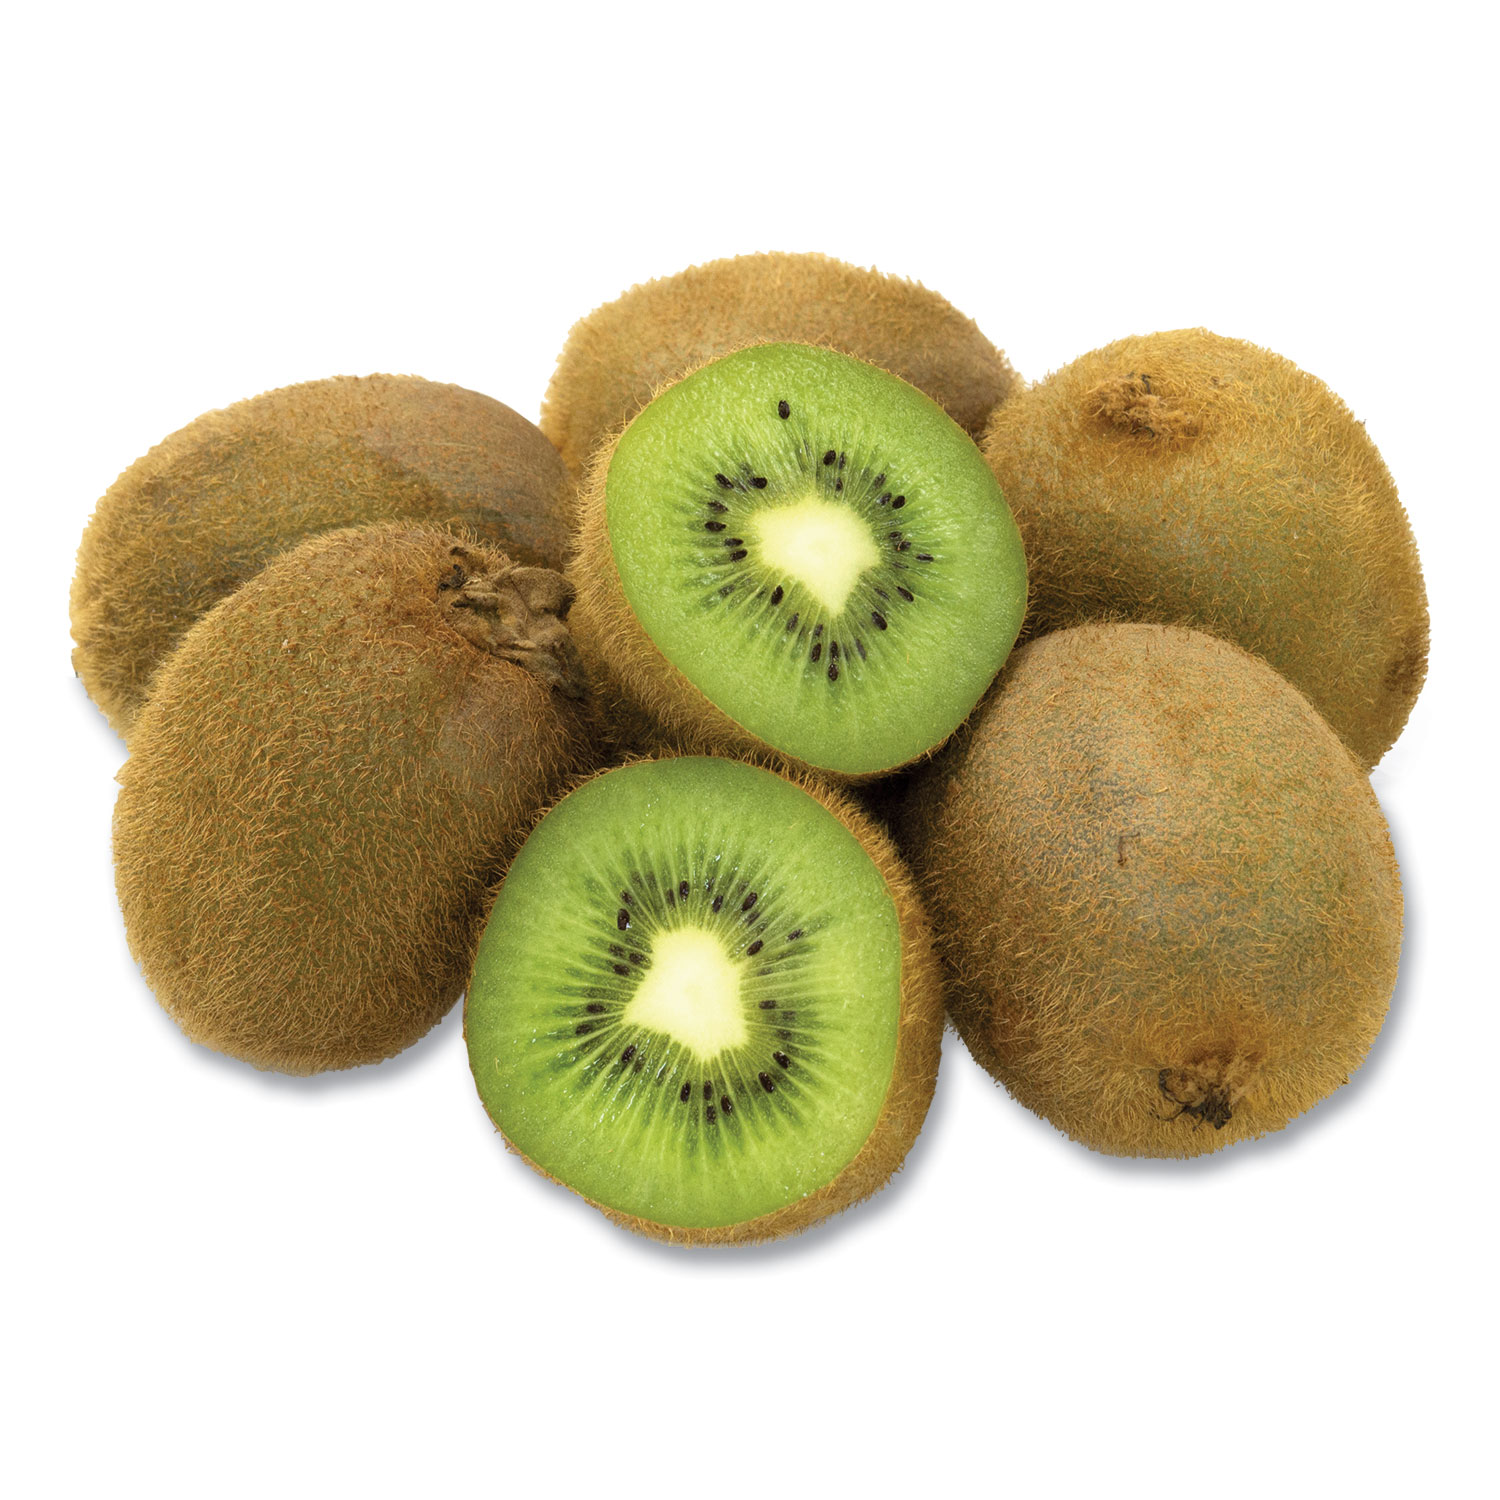  National Brand 195302 Fresh Kiwi, 3 lbs, Free Delivery in 1-4 Business Days (GRR90000134) 